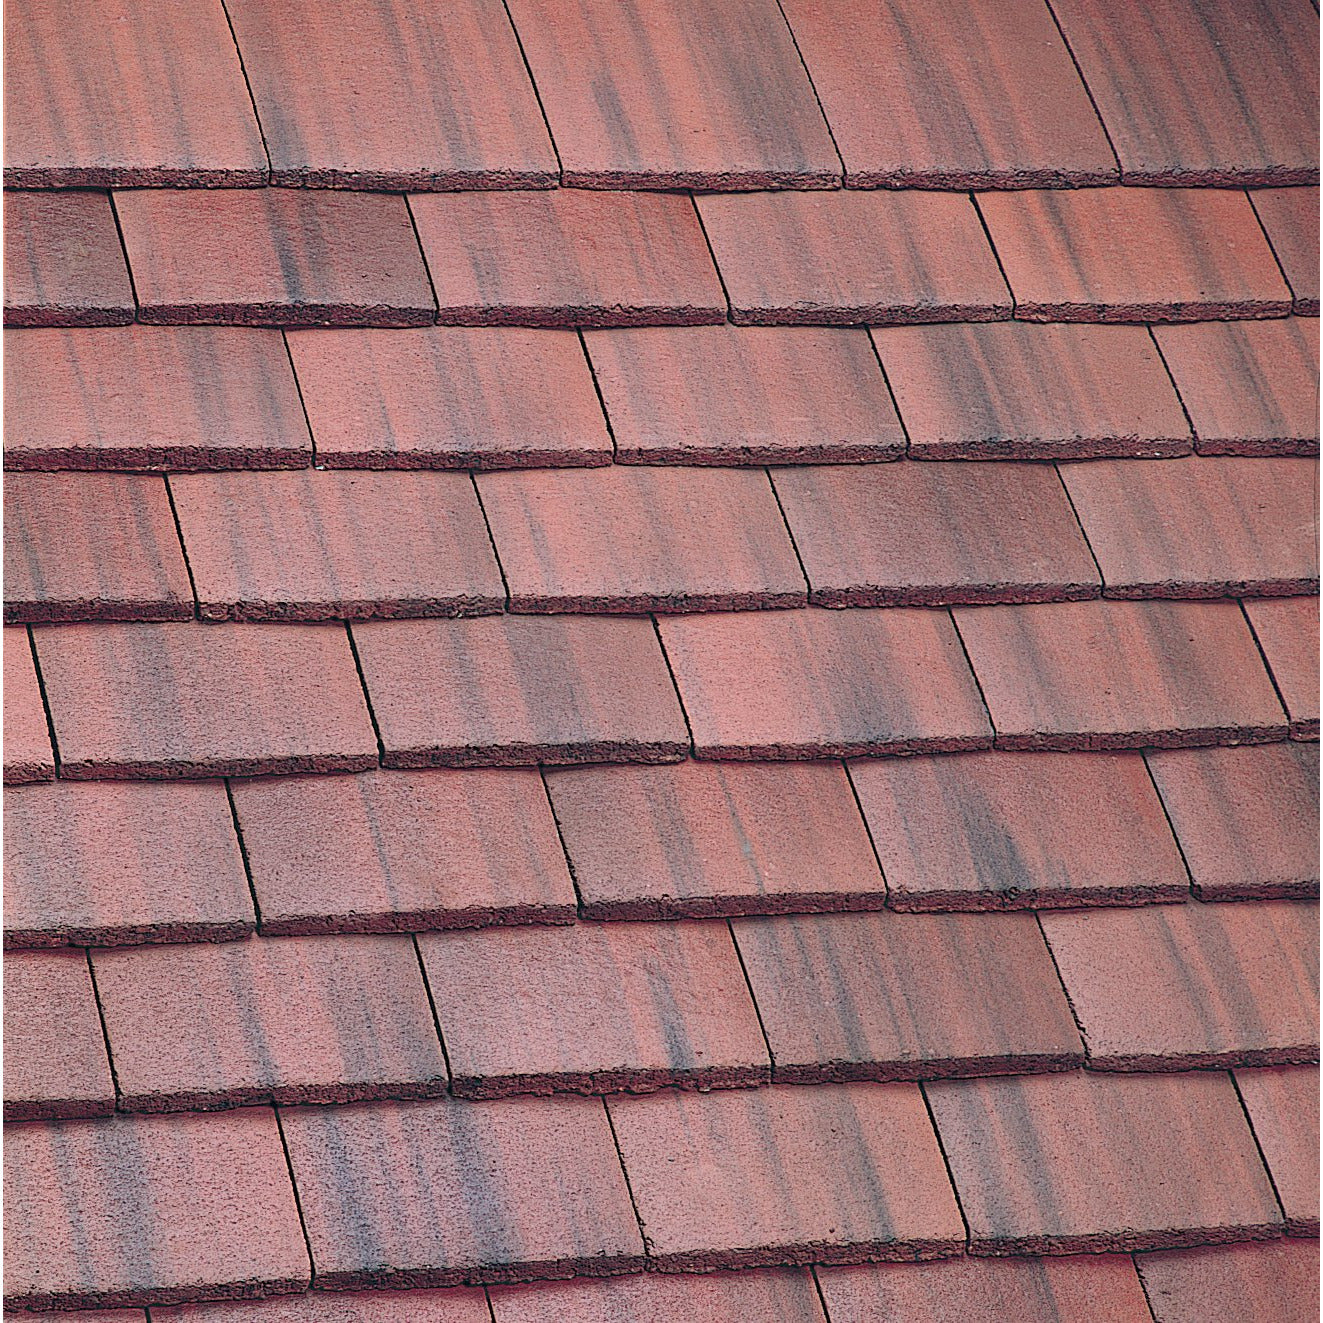 Marley Concrete Plain Roof Tile - Old English Dark Red